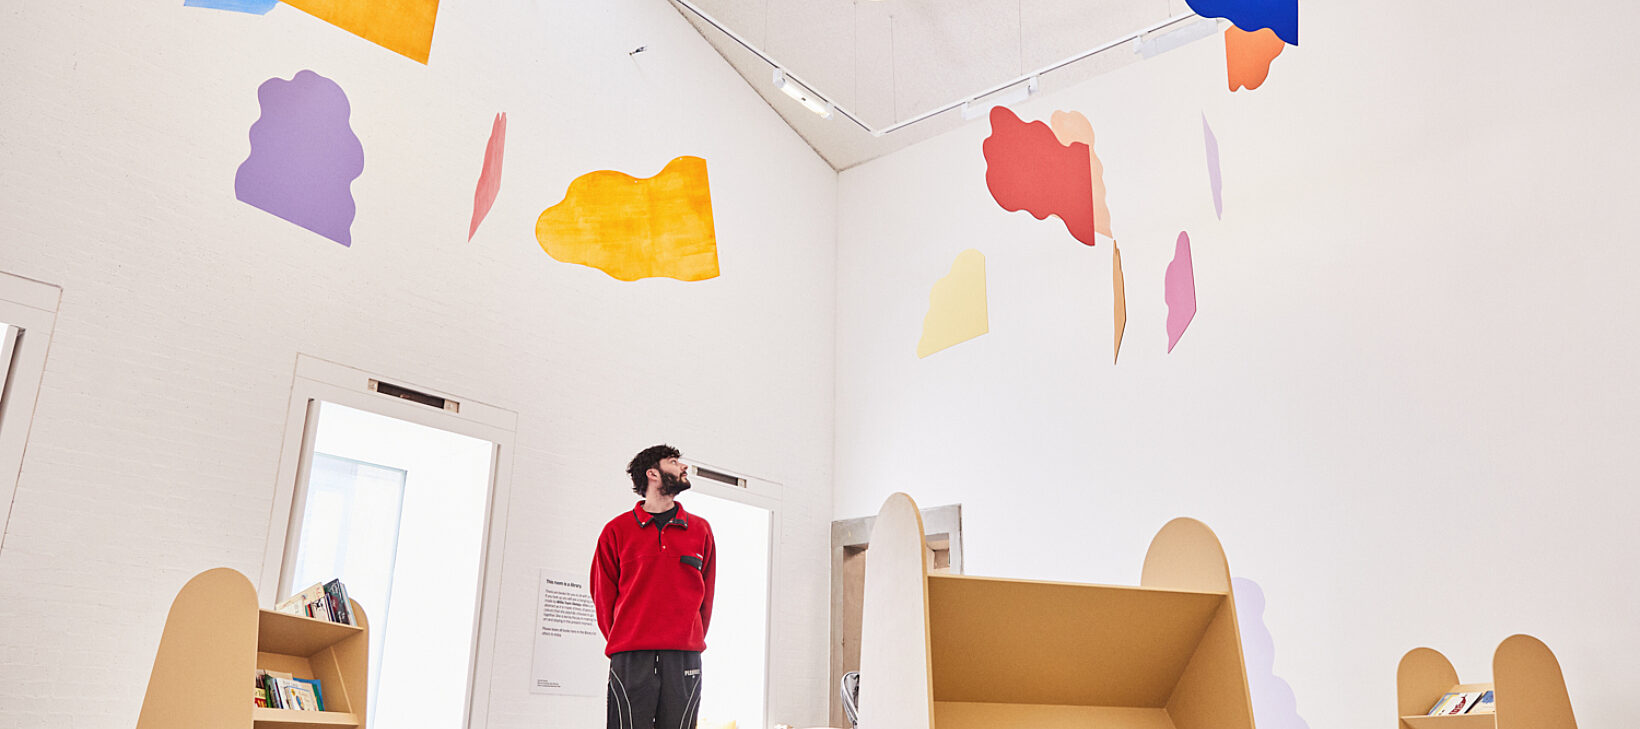 A colourful mobile made out of cloud shapes suspended in a white-walled room. A man in a red fleece looks at it.